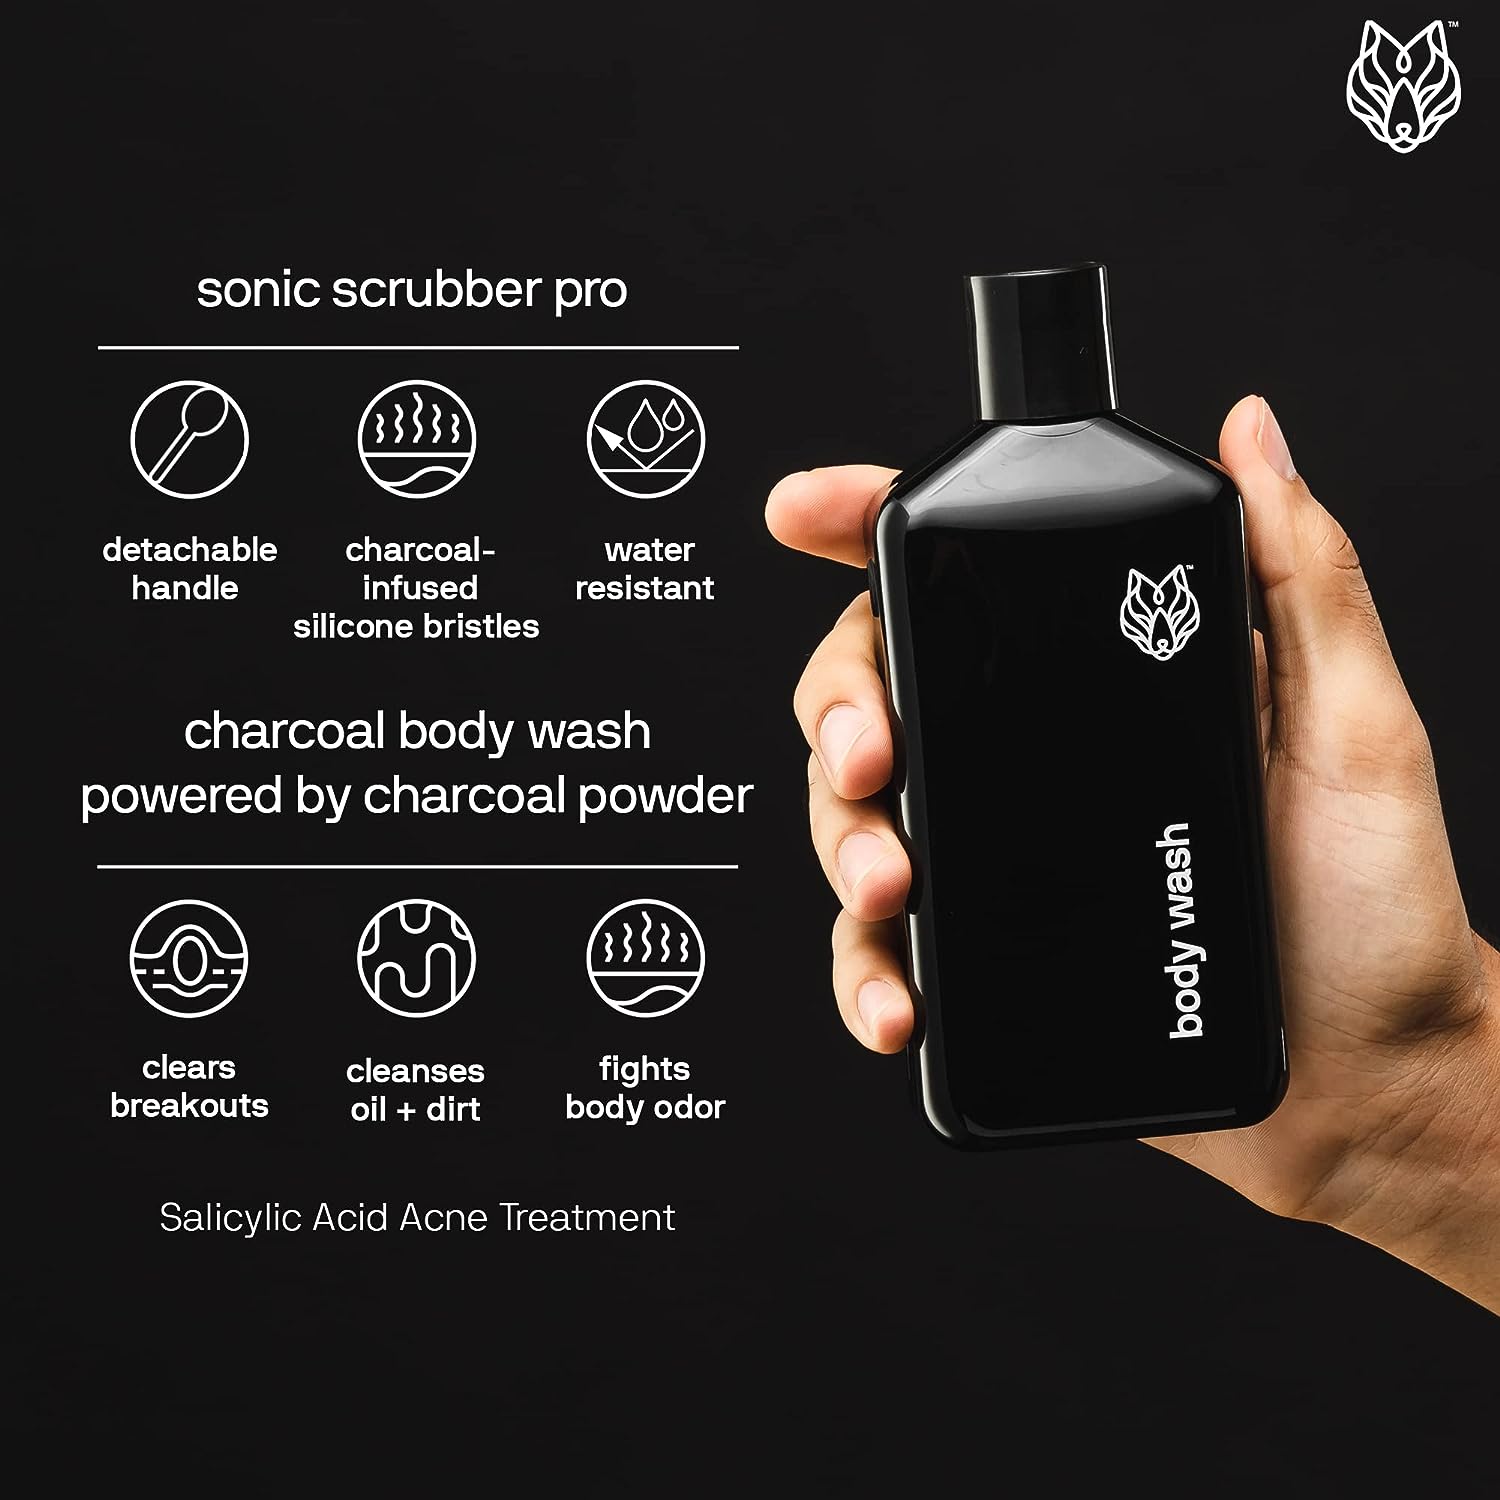 Black Wolf Body Wash & Sonic Scrubber Pro Kit for Men - Vibrating Face & Body Brush with Charcoal Powder Shower Gel, Water Resistant Massage Brush & Salicylic Acid Body Wash, Rich Lather & Deep Clean : Beauty & Personal Care